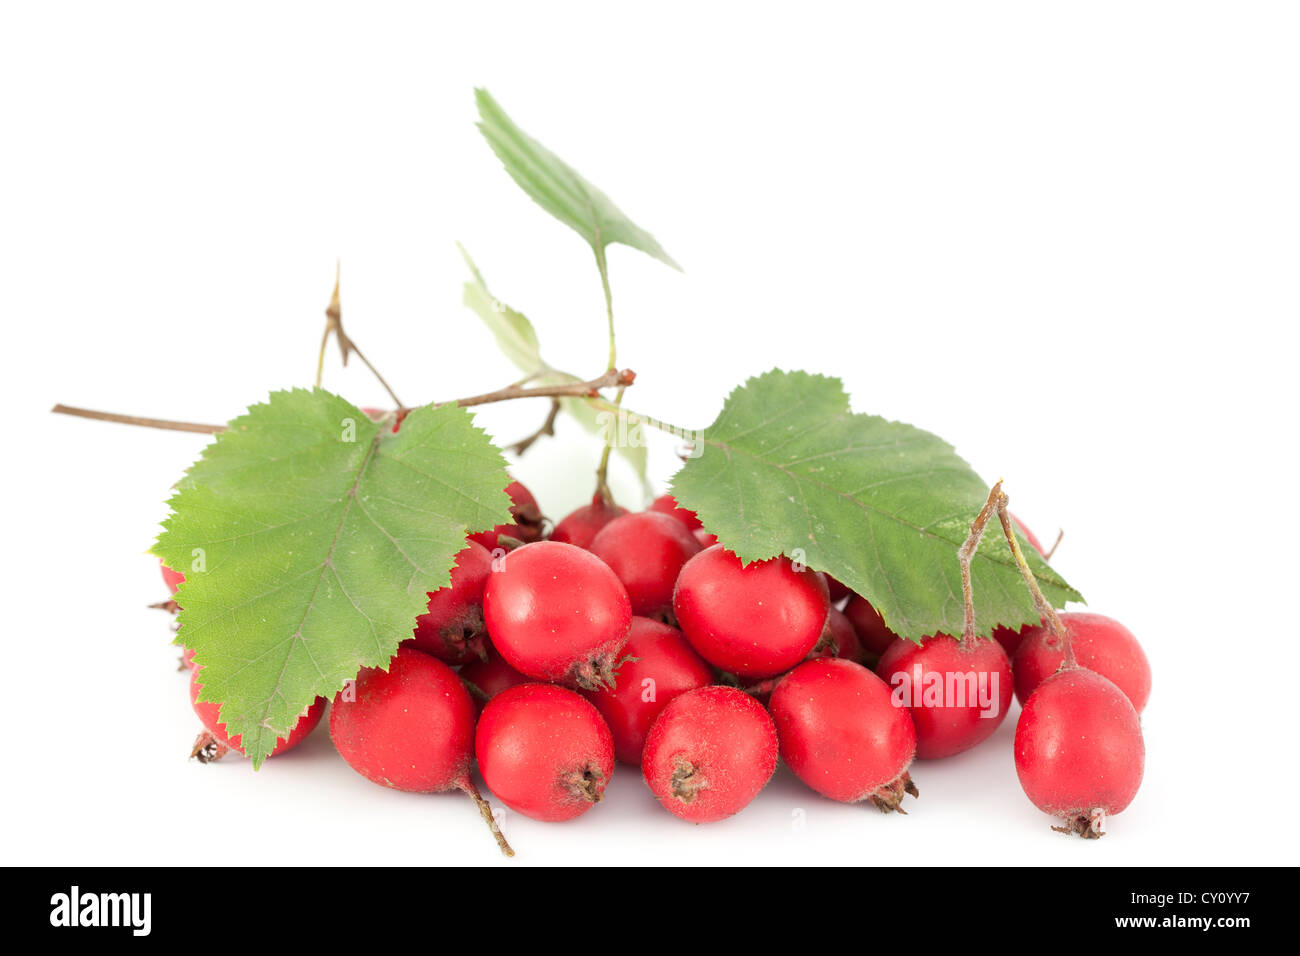 Hawthorn branch and red fruits on white background Stock Photo